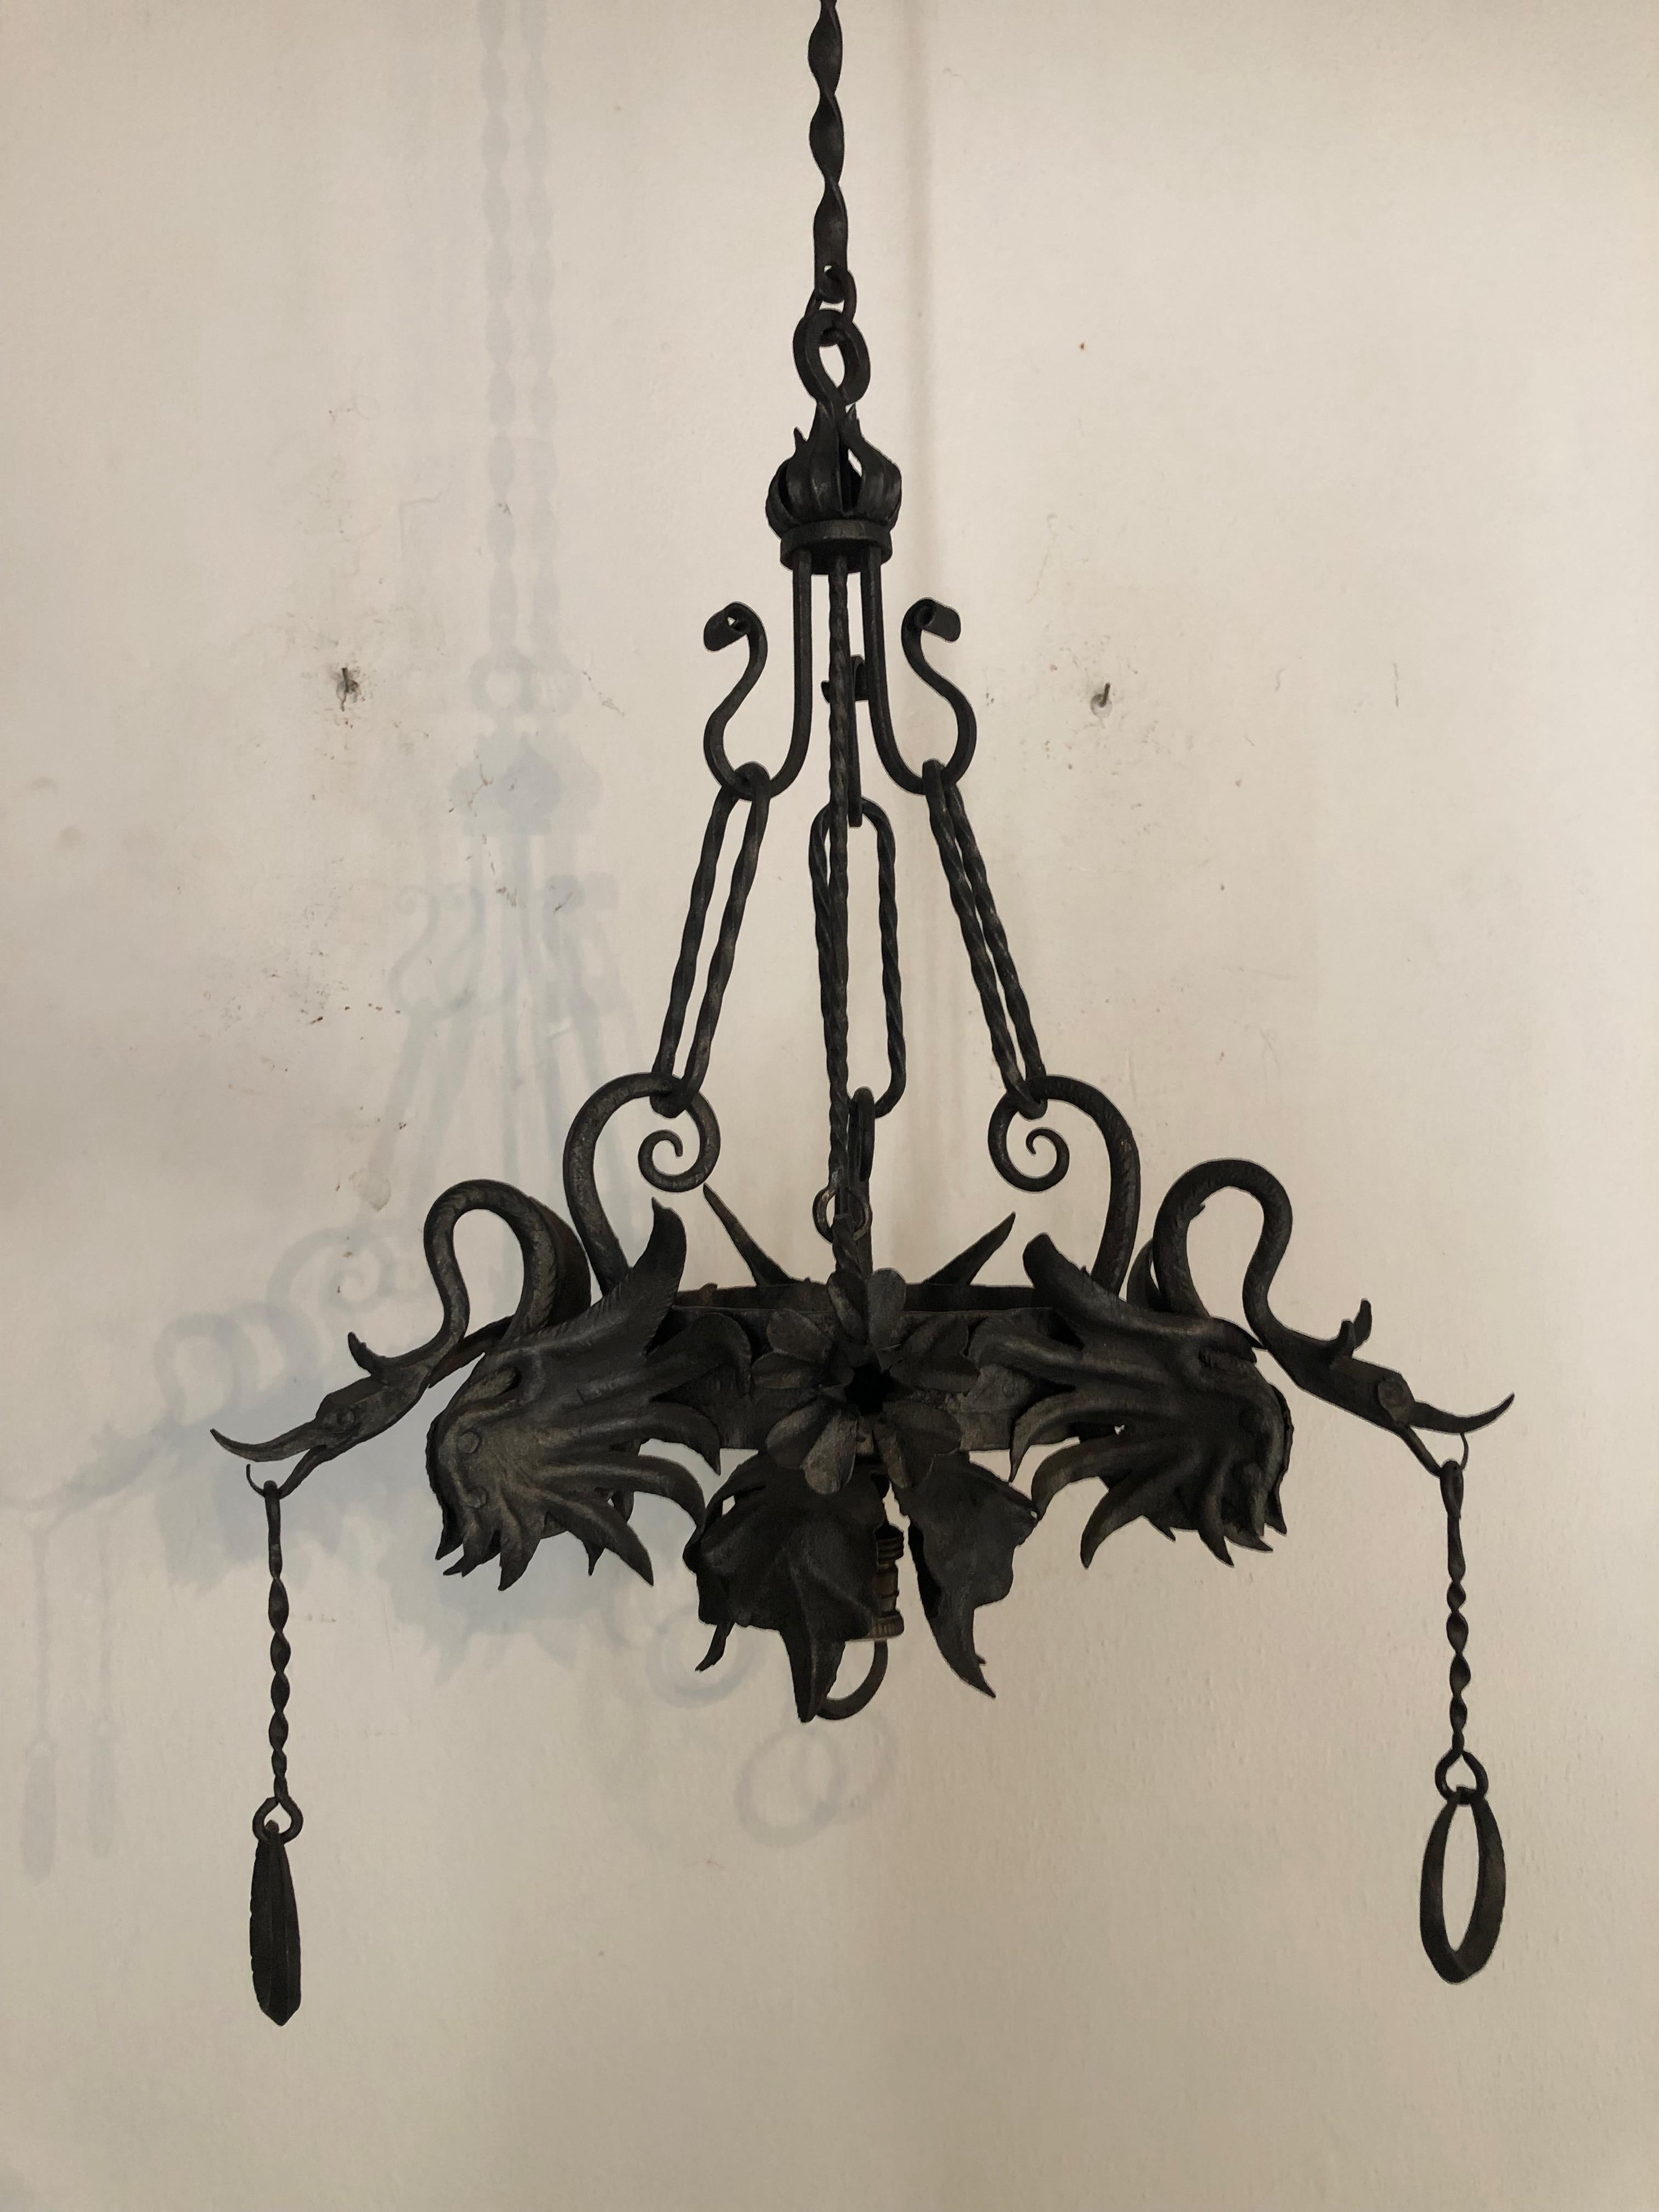 Housing one light, will be rewired to appropriate country. Detachable chains. Detailed dragons and flowers. Huge canopy still intact. Wrought iron has been treated to stop any rust. Free priority shipping from Italy.